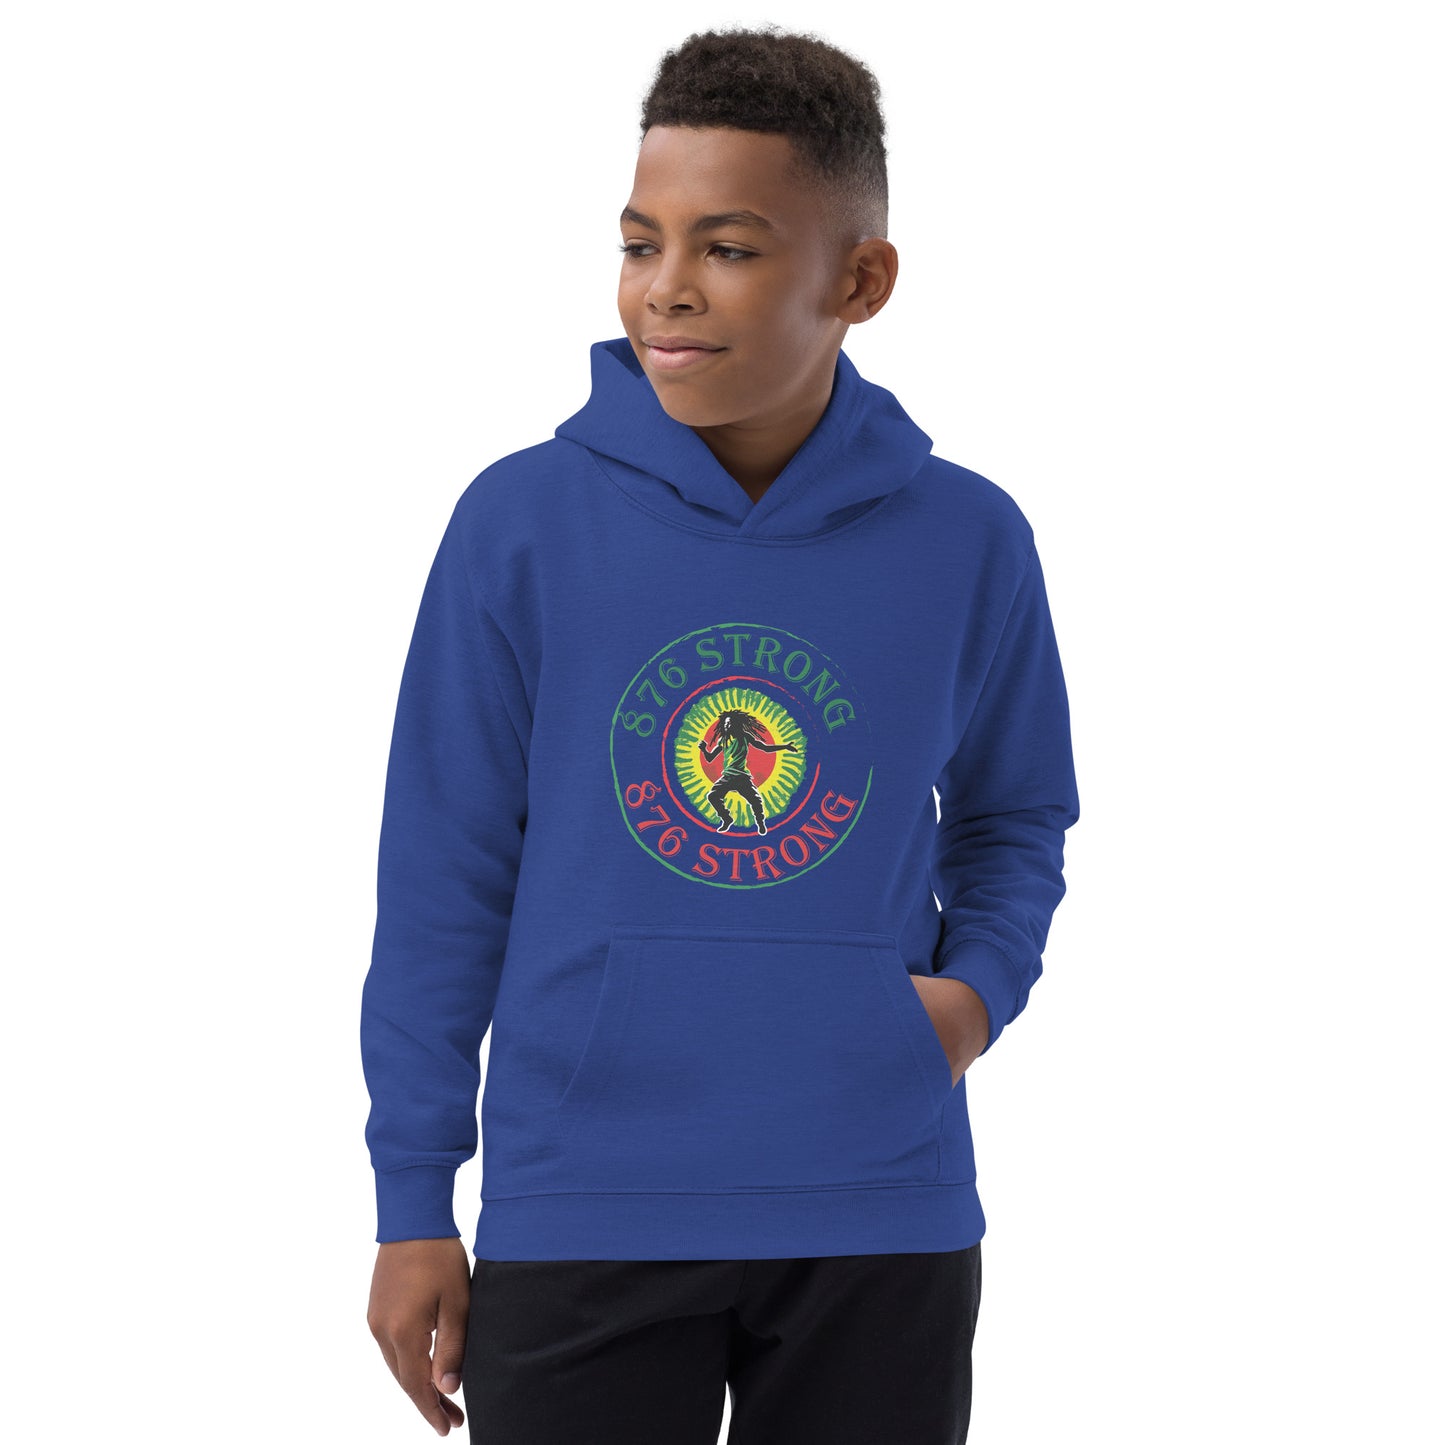 Youth "876 Strong" Hoodie